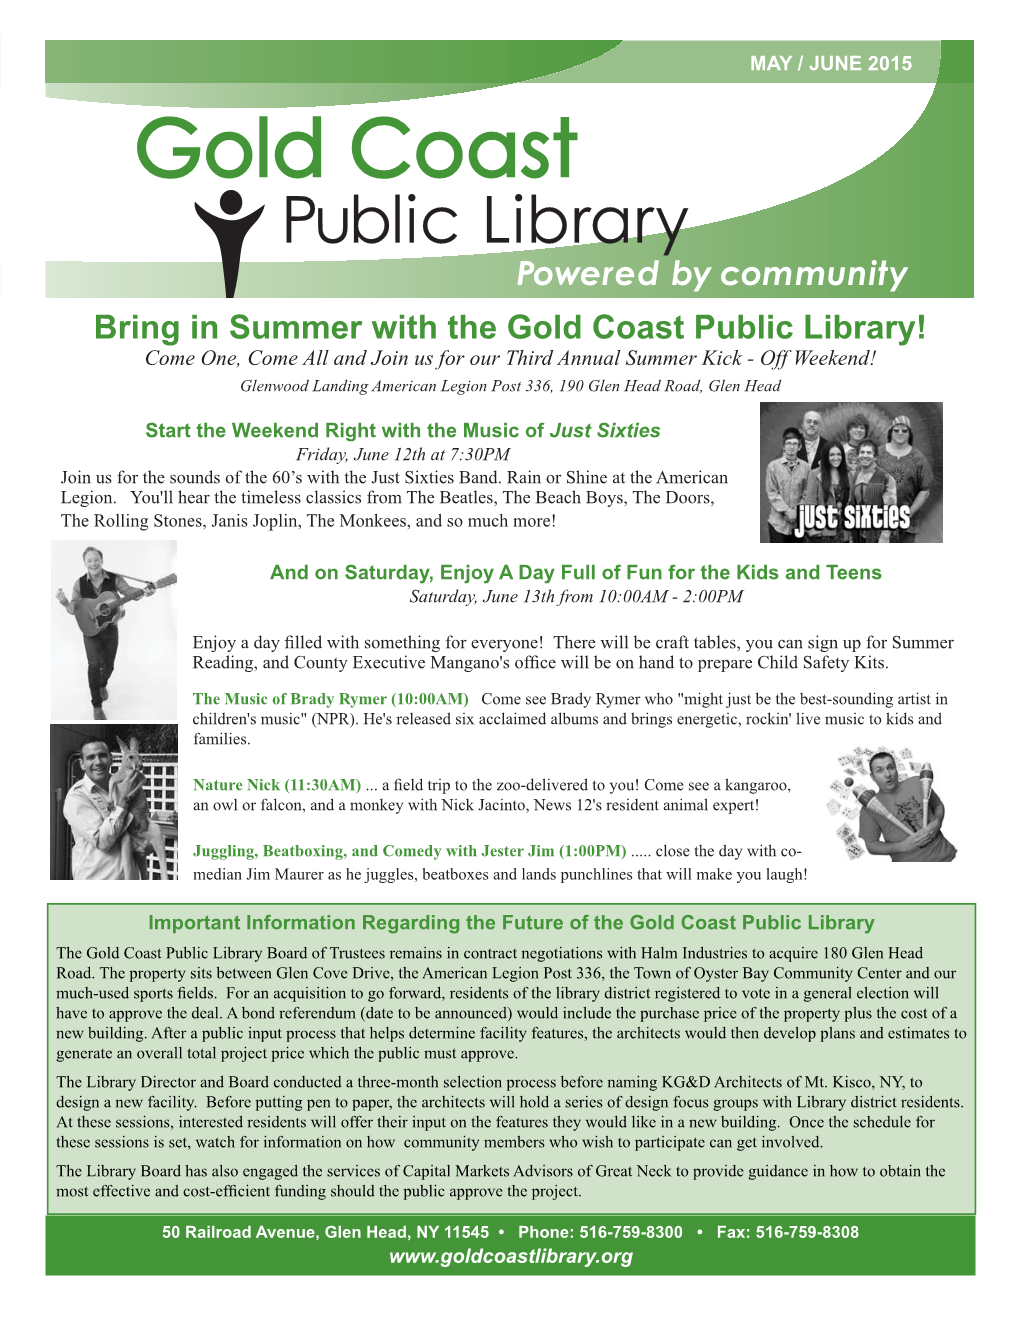 Bring in Summer with the Gold Coast Public Library!